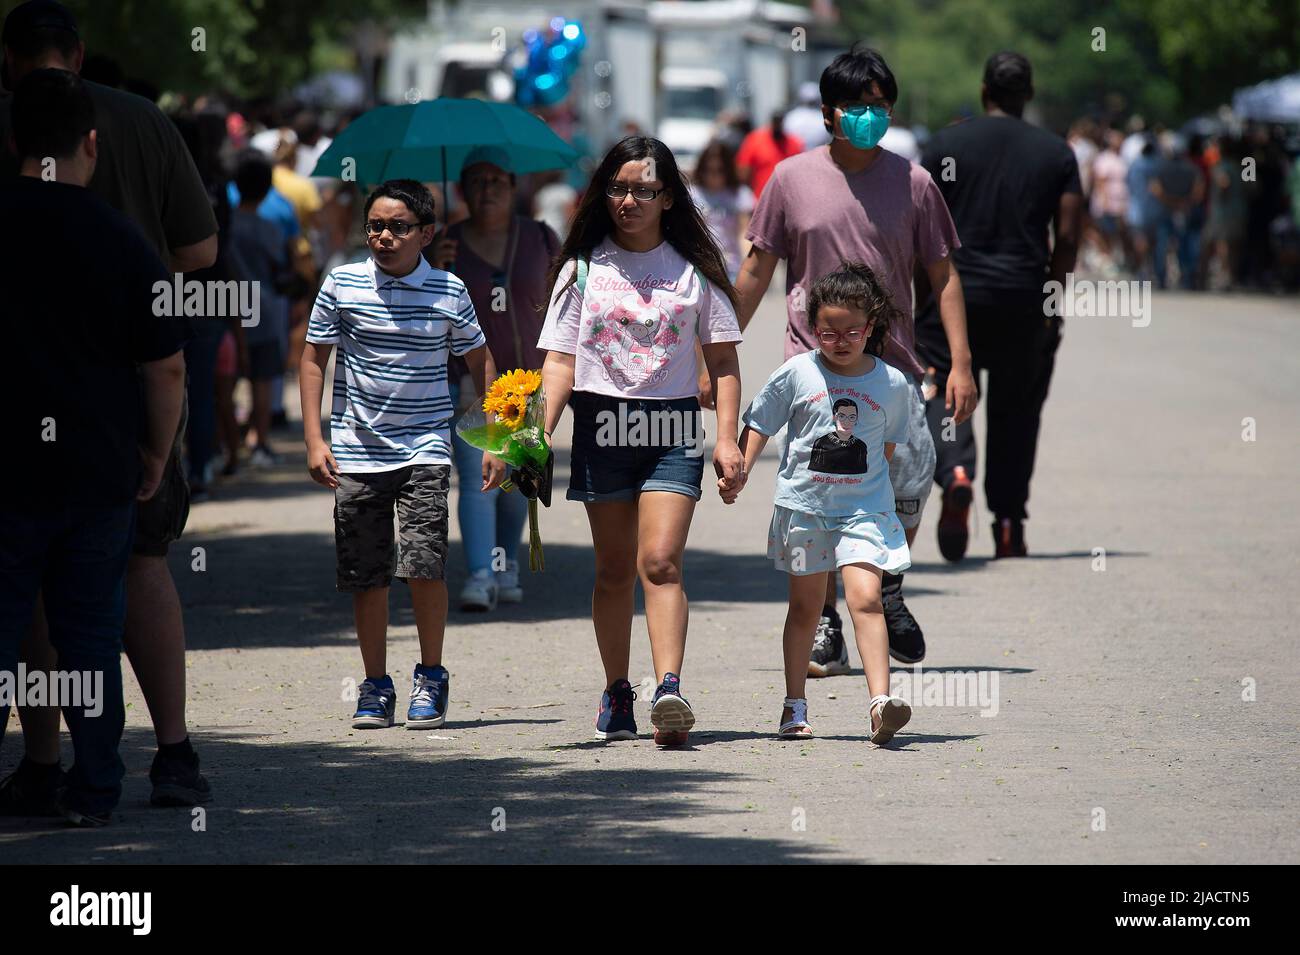 Robb Elementary School. 29th May, 2022. Residents stand in line to give their respects to the 19 children killed in the mass shooting at Robb Elementary School. Uvalde, Texas. Mario Cantu/CSM/Alamy Live News Stock Photo